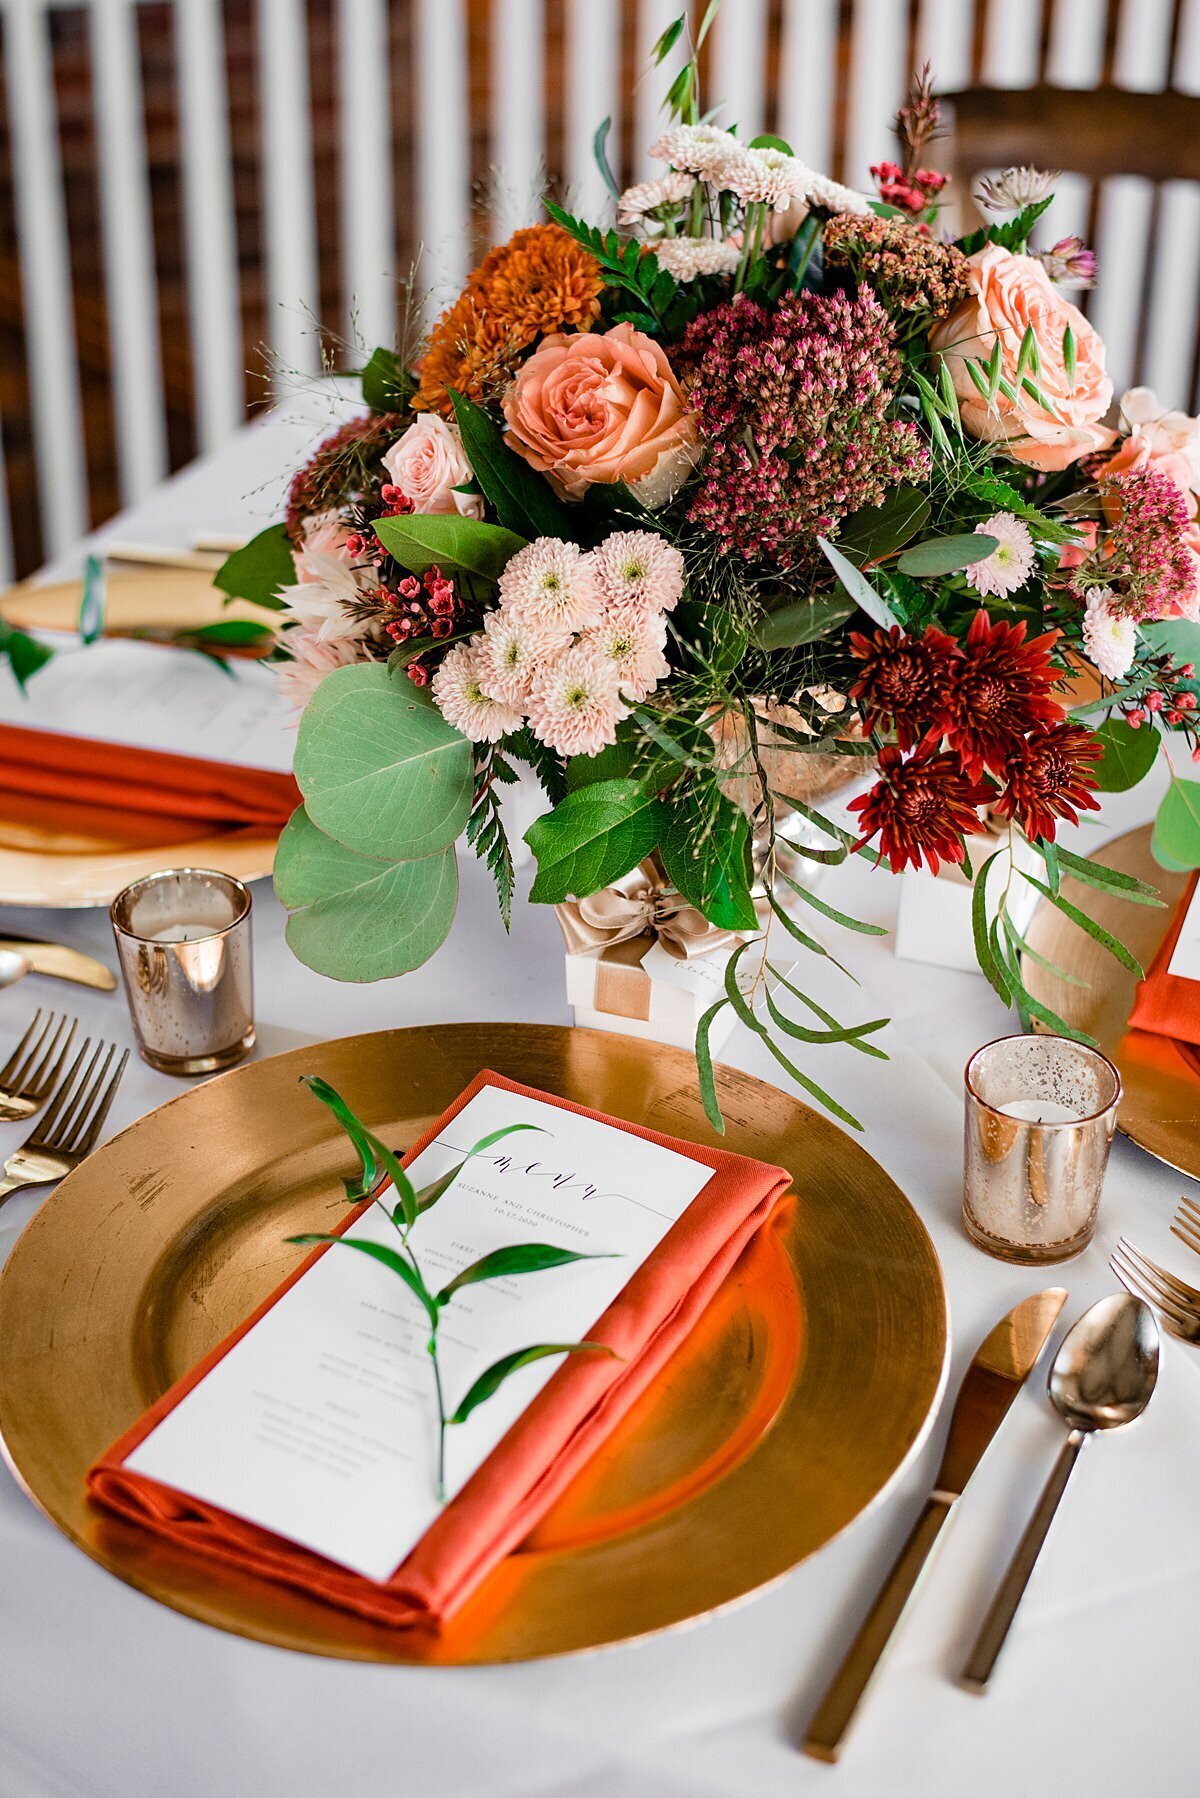 A table covered with a white linen is set with a gold charger and a folded rust colored napkin with a menu card and sprig of greenery. On either side of the plate is golf flatware and gold votive candles. At the center of the table is a large round centerpiece of eucalyptus, peach roses, burgundy mums, blush mums, blush tea roses, orange mums and ivory anemone.